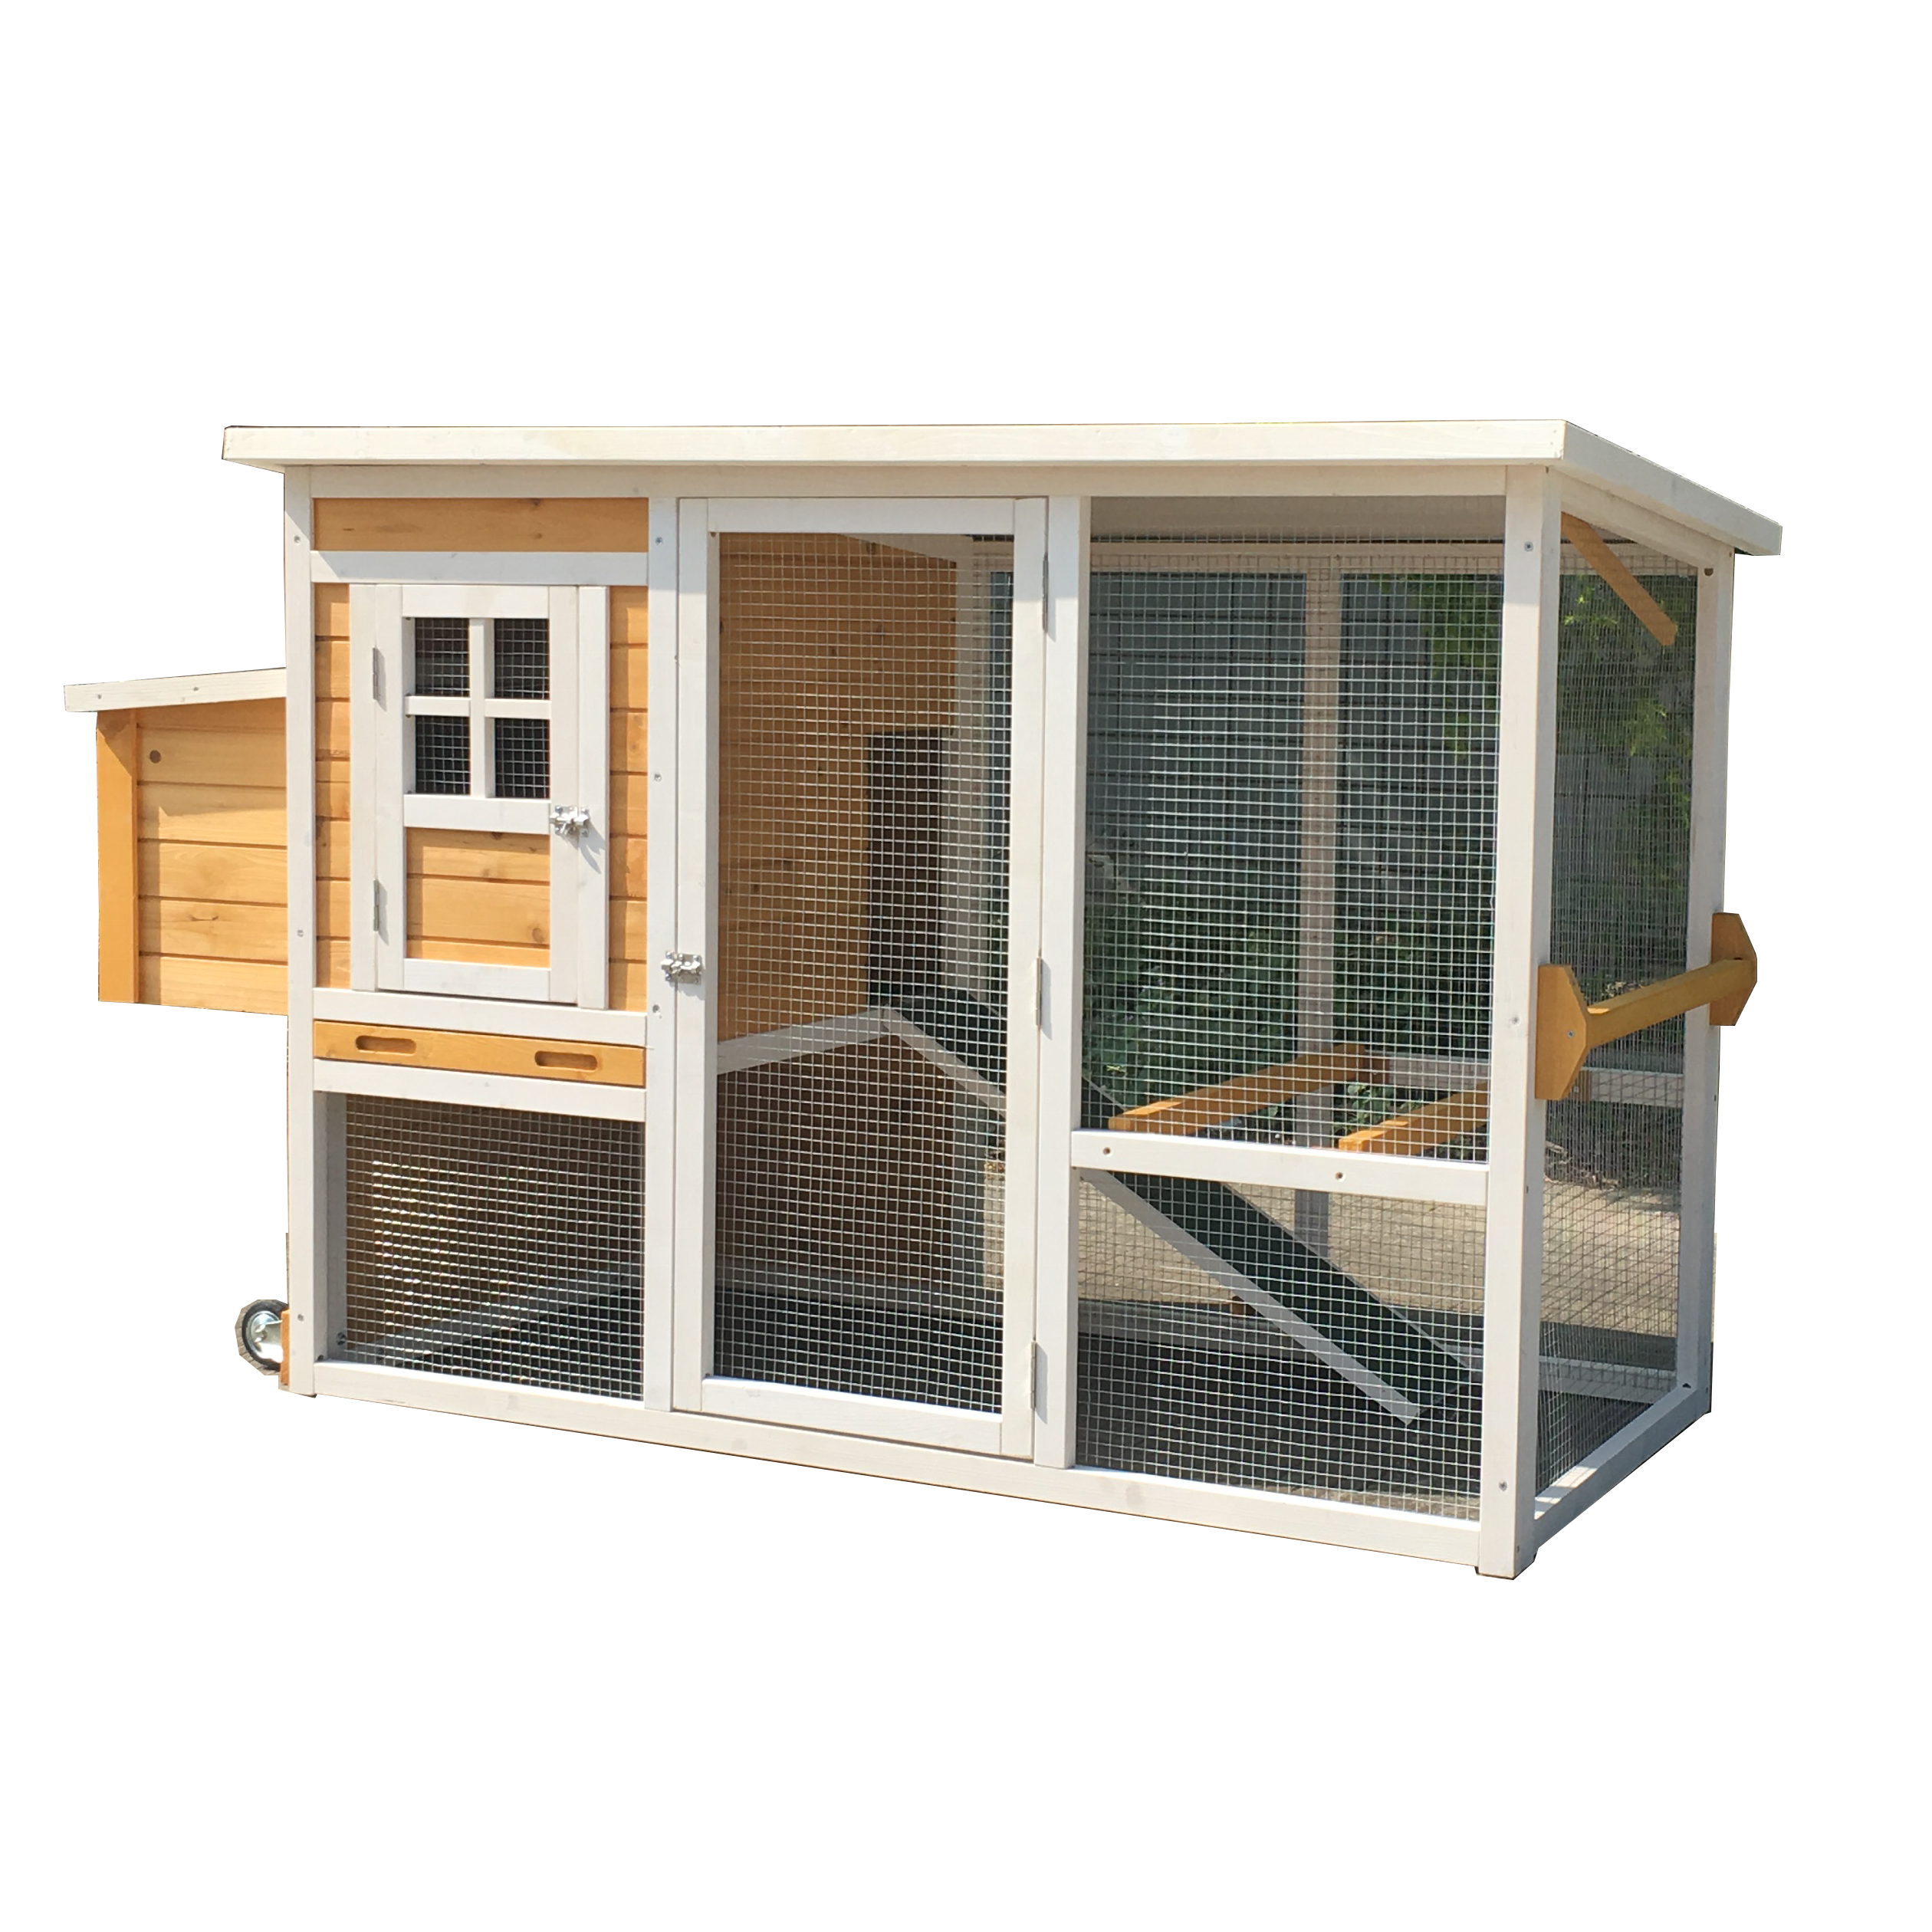 factory custom mobile tractor large backyard cheap walk-in steel wooden chicken coop run layers for 6 chickens birds sale